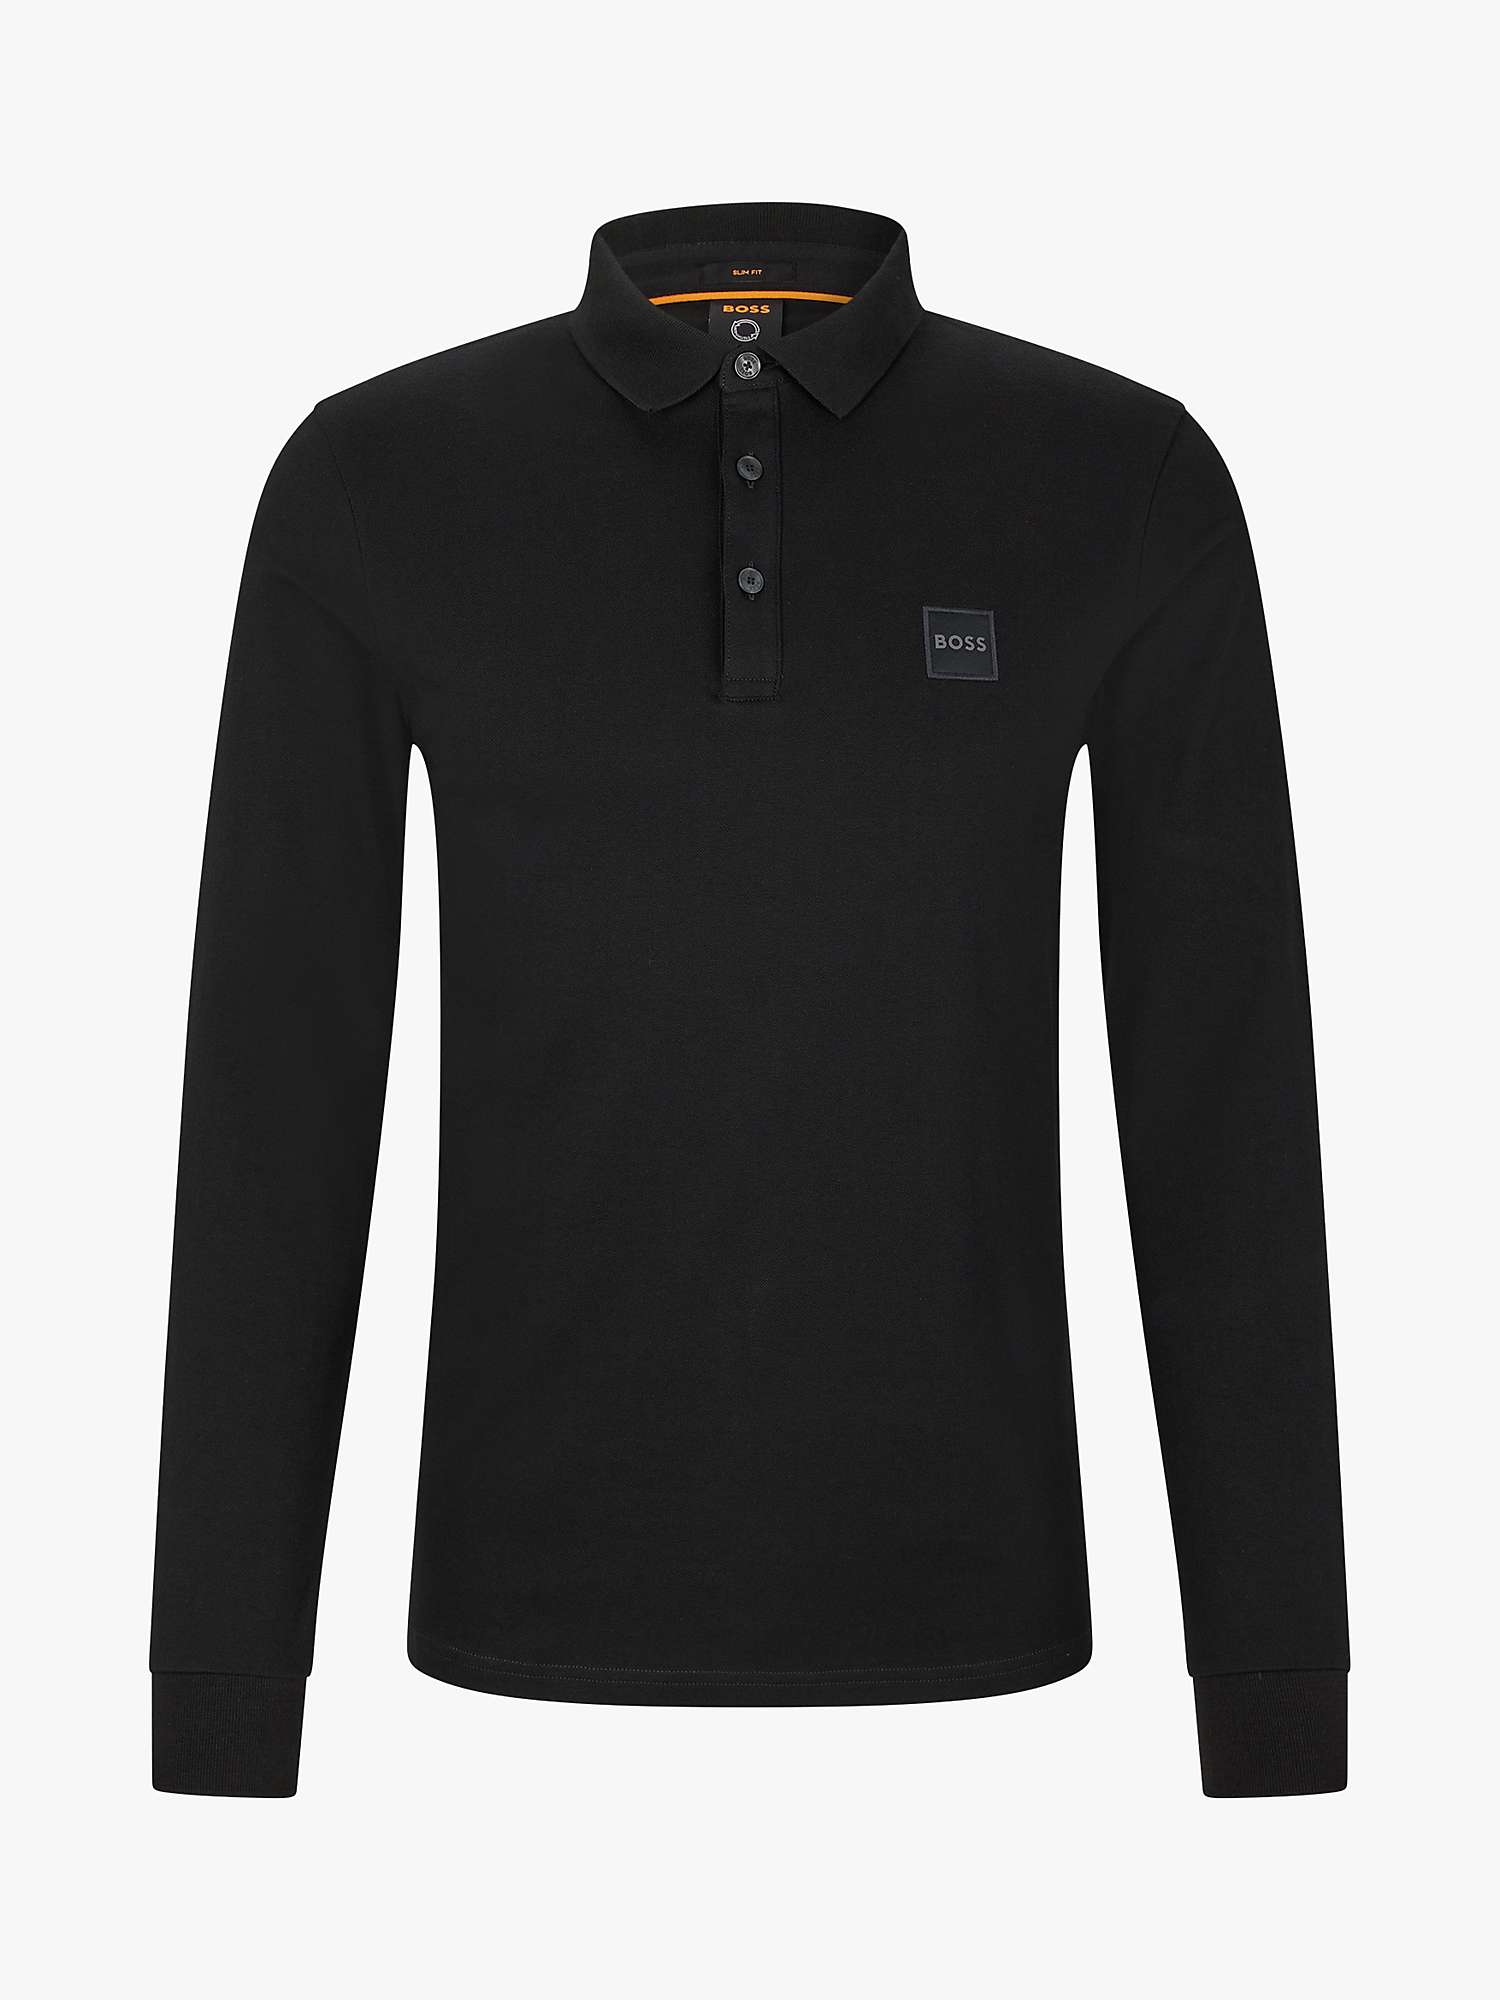 Buy BOSS Passerby Long Sleeve Polo Shirt Online at johnlewis.com